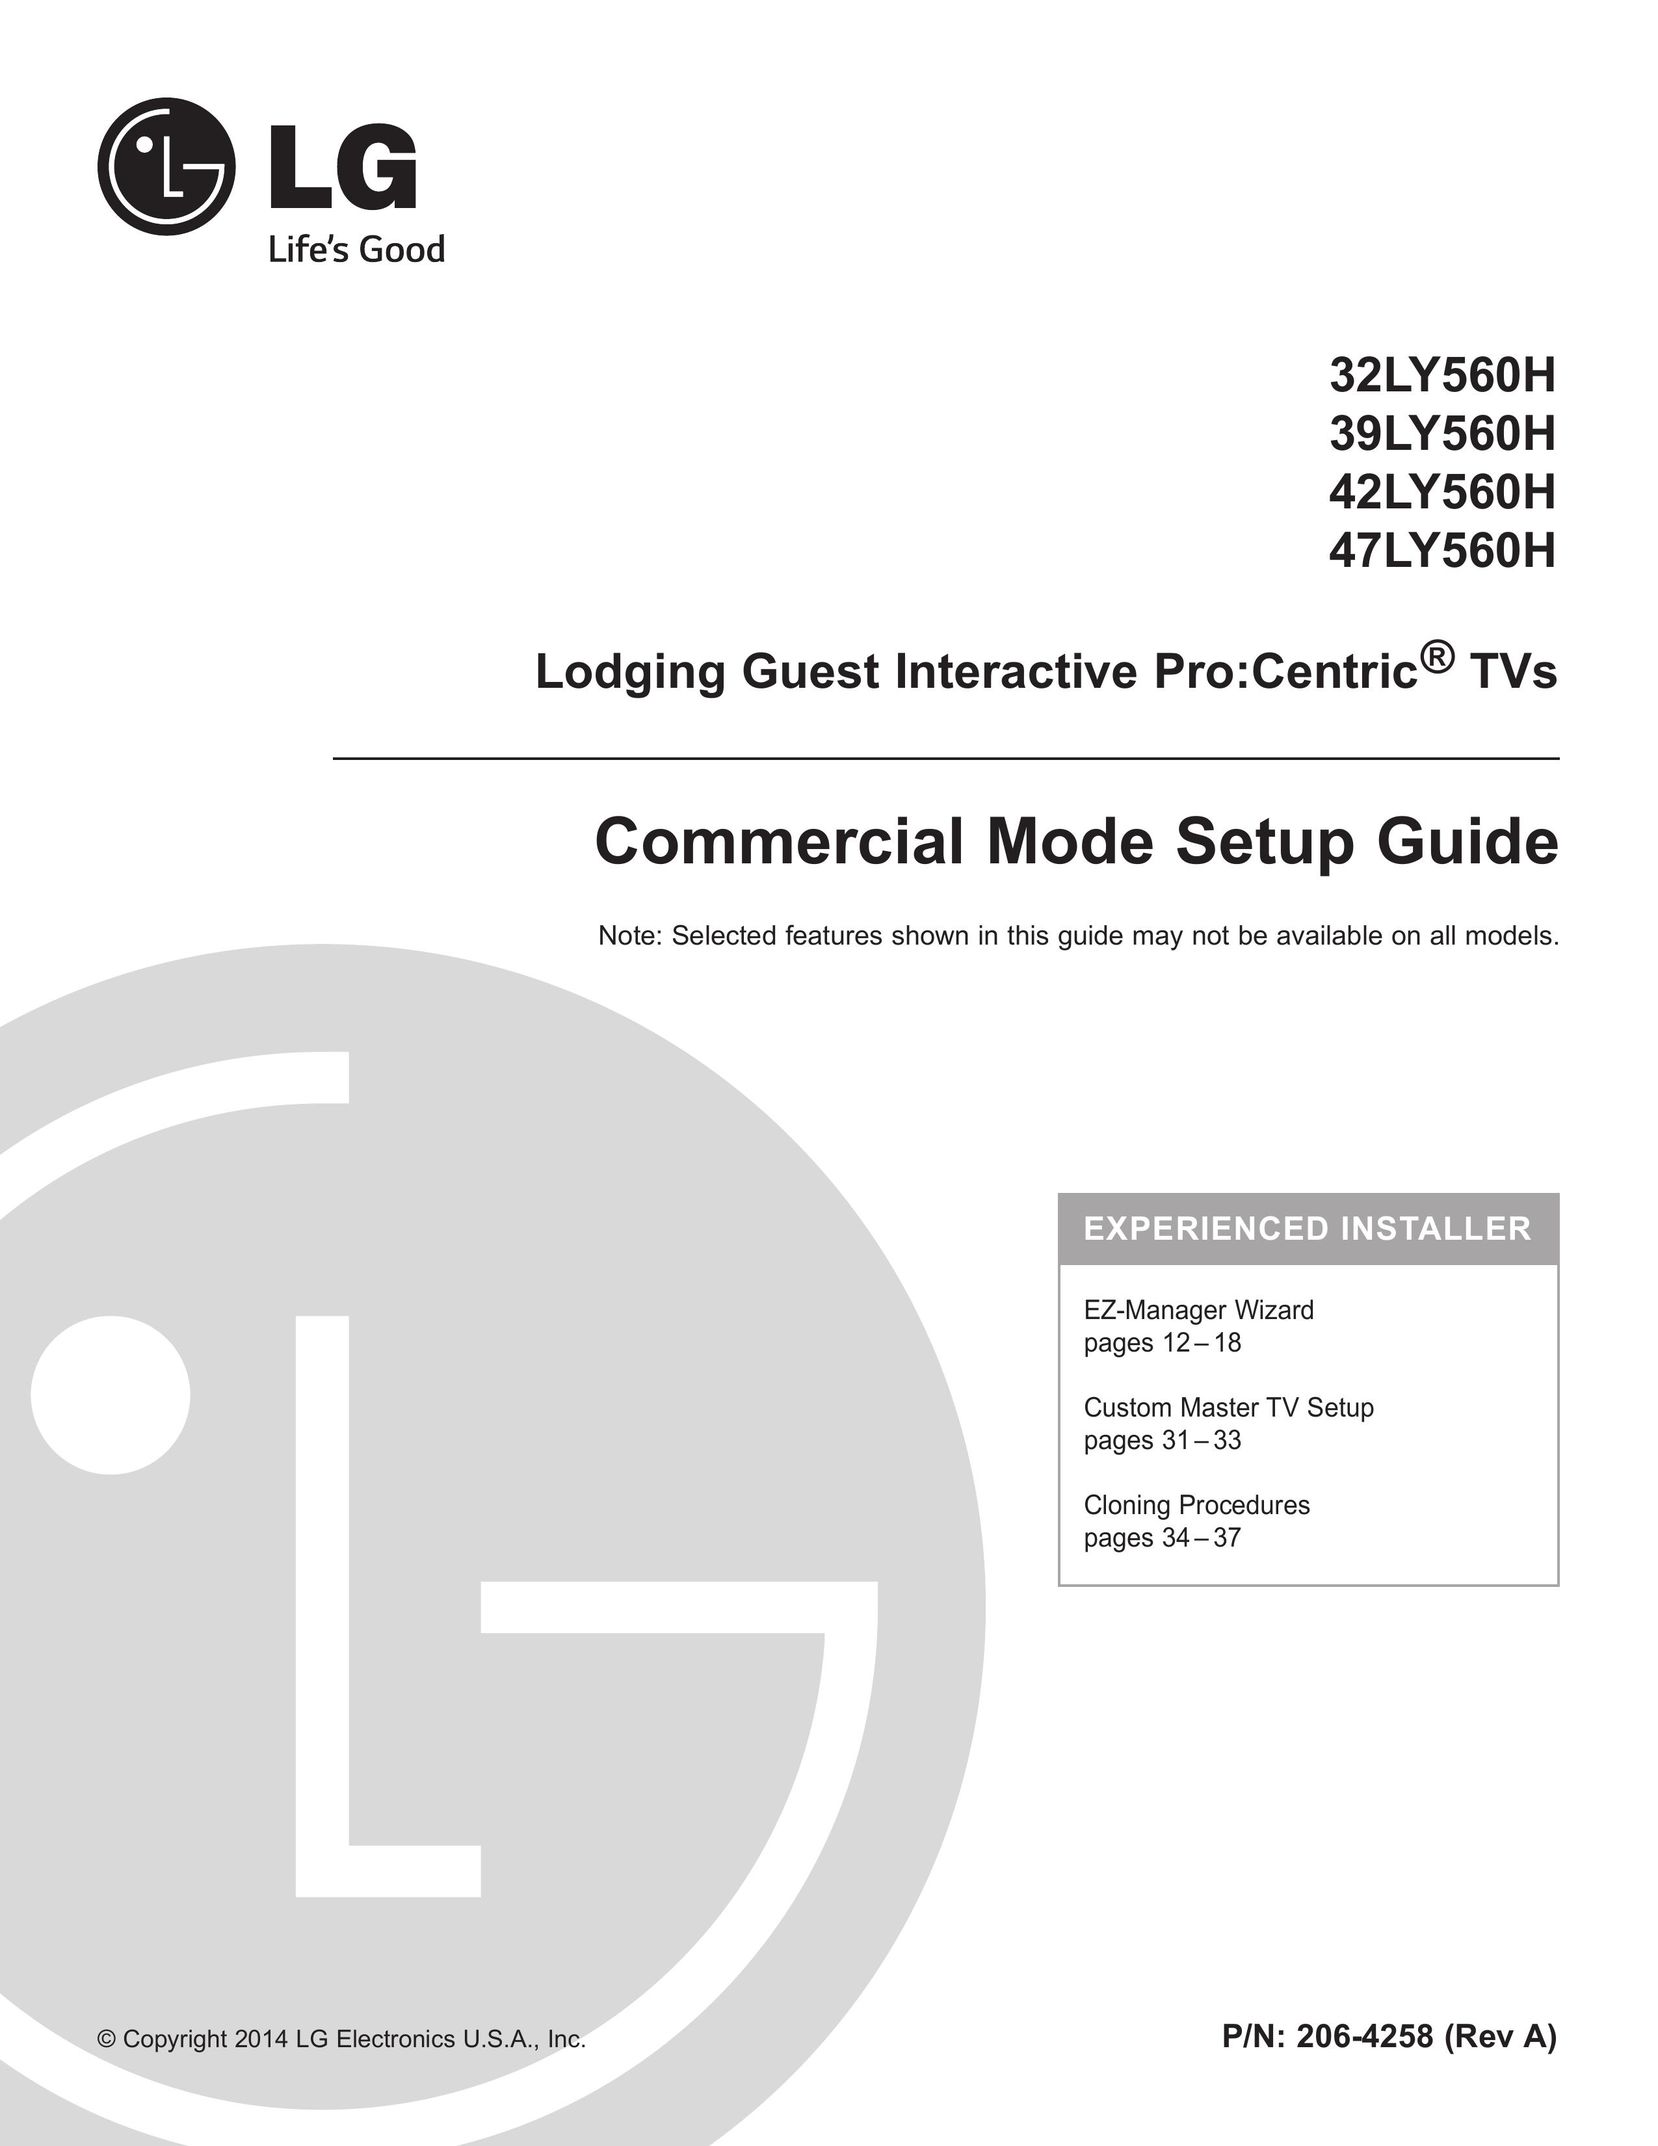 LG Electronics 42LY560H Model Vehicle User Manual (Page 1)